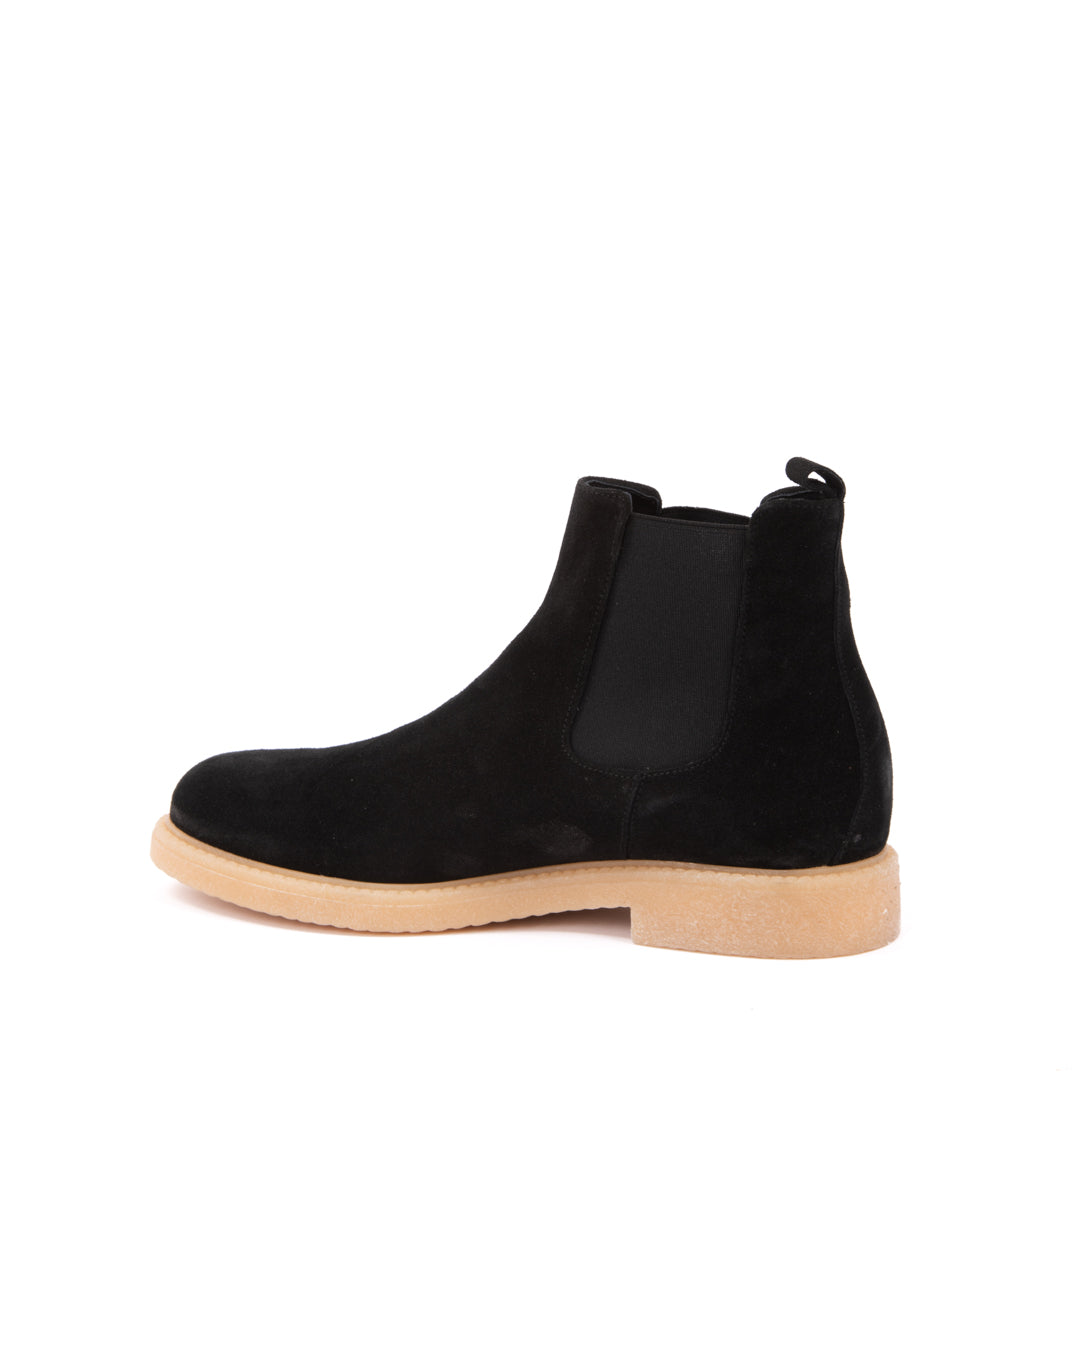 Eagle - crepe bottom ankle boot in black suede